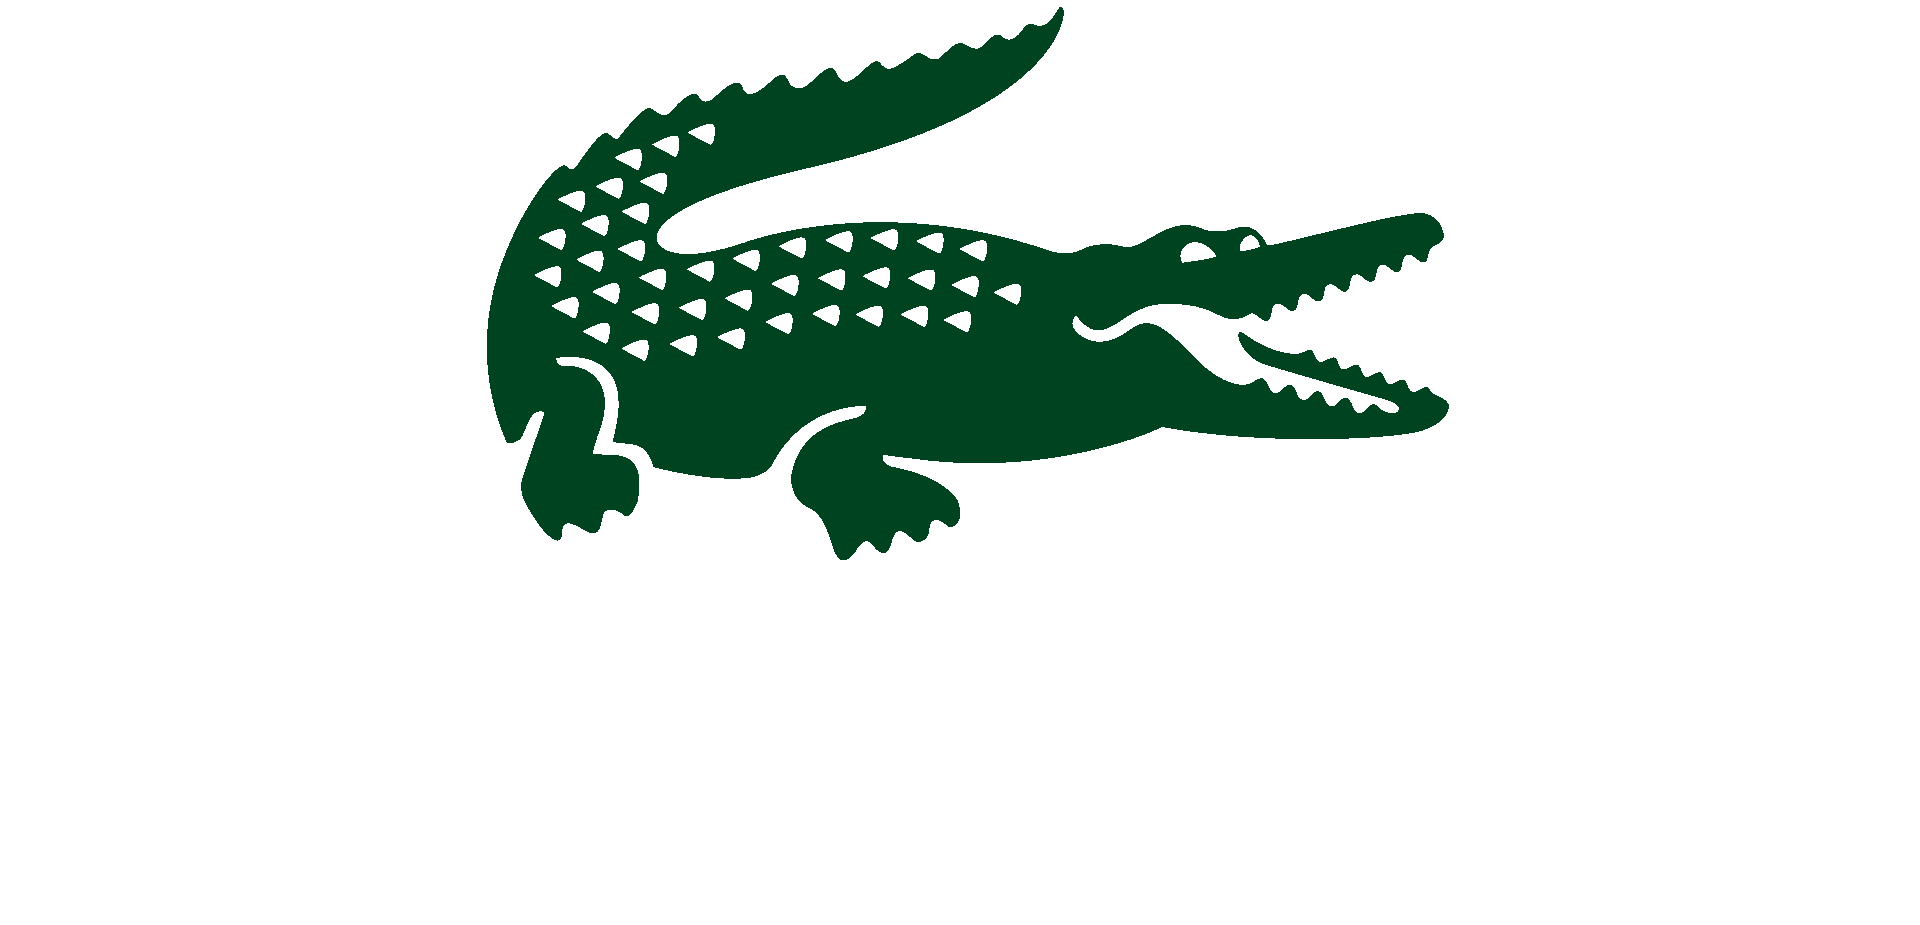 In this example, we extract the green alligator from Lacoste's logo. Once we load the PNG of the logo, we click on the crocodile above the brand's name. The crocodile's color gets substituted in the color match option and in the output, we get the image of this reptile. (Source: Wikipedia.)